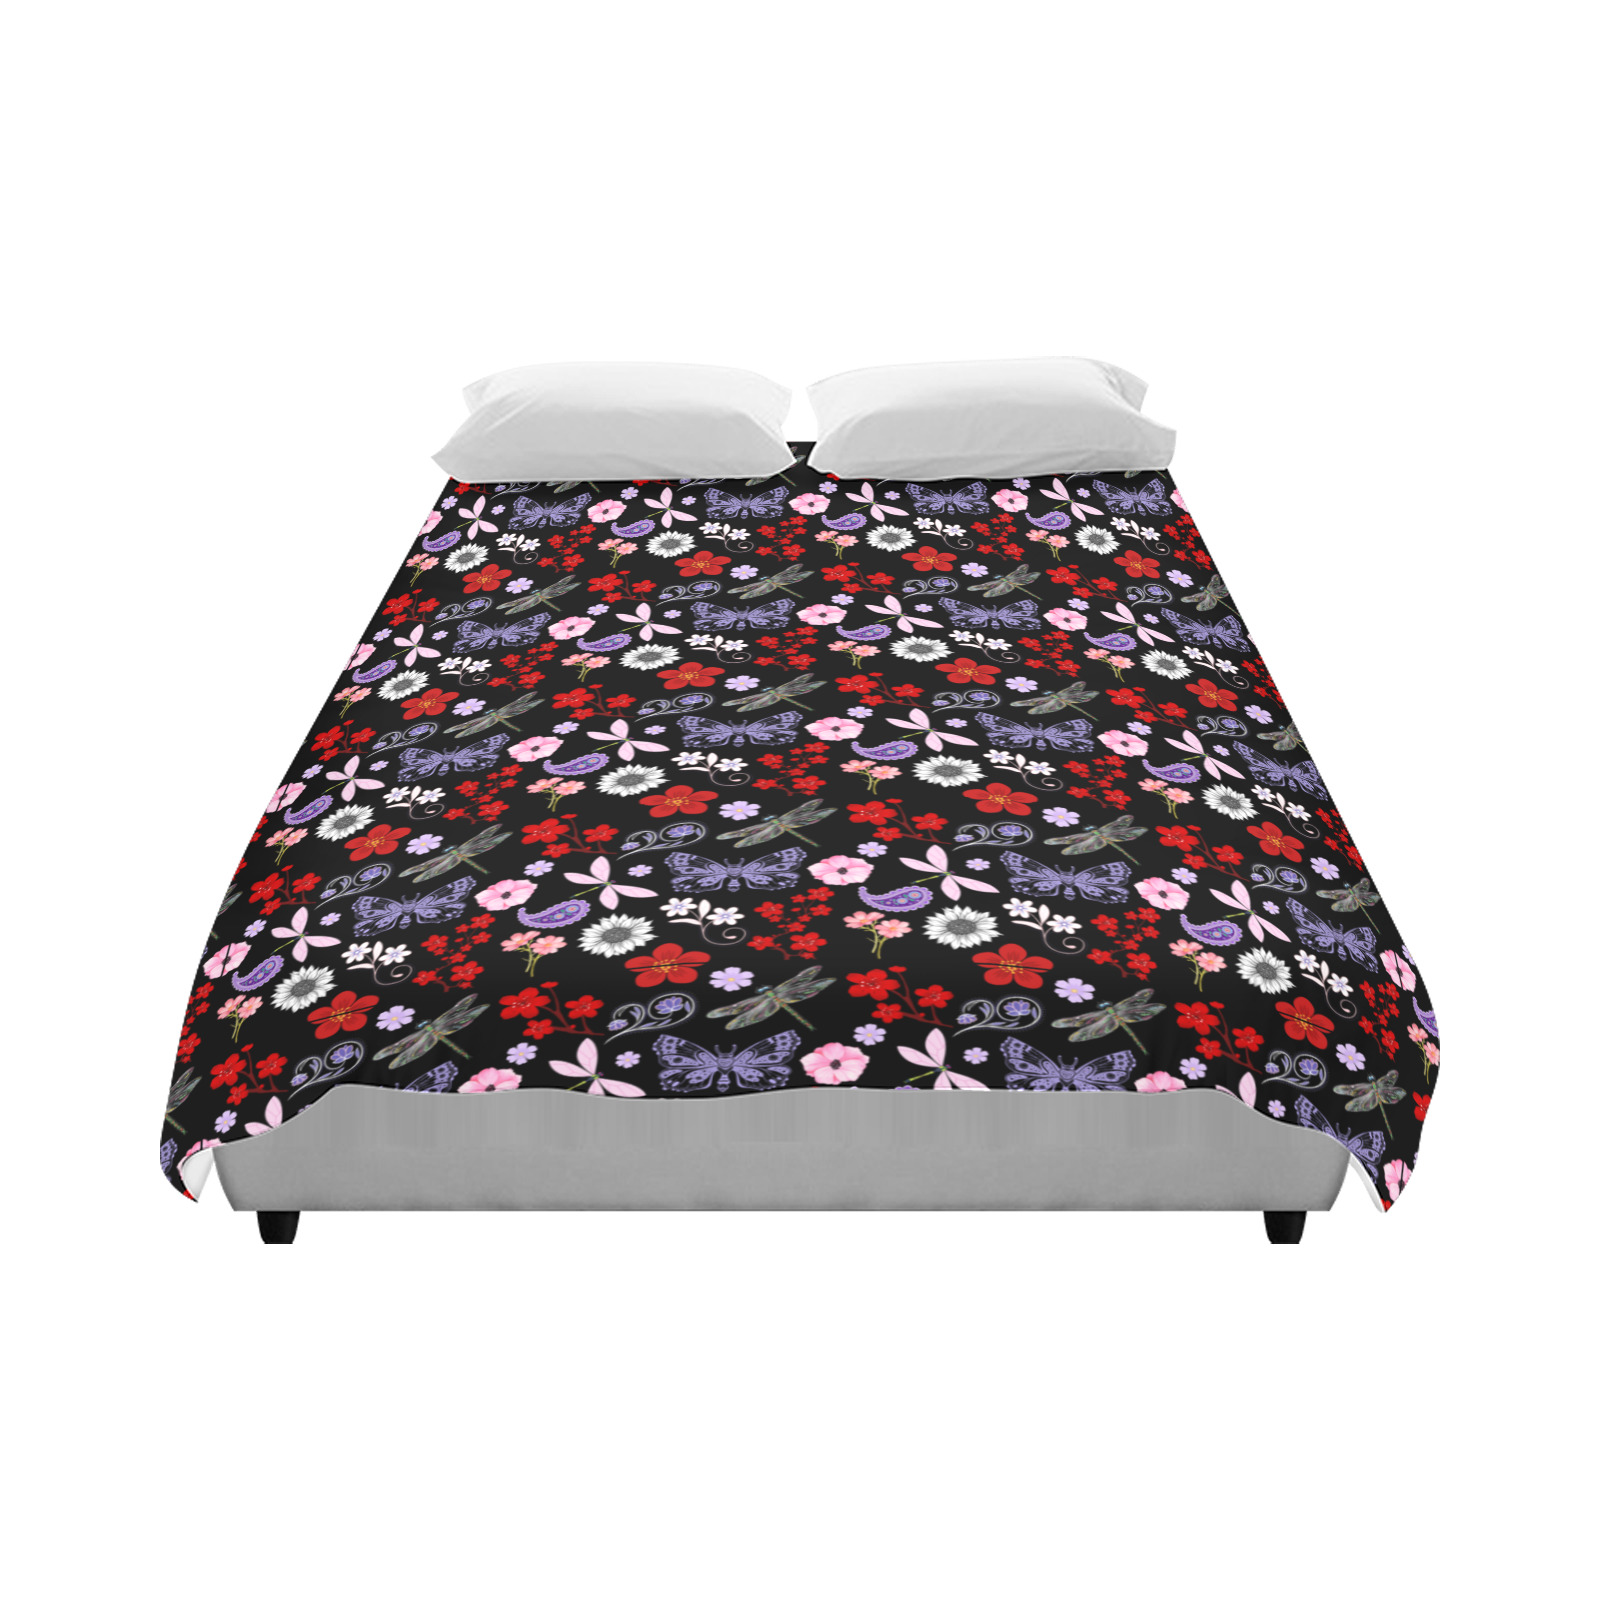 Black, Red, Pink, Purple, Dragonflies, Butterfly and Flowers Design Duvet Cover 86"x70" ( All-over-print)